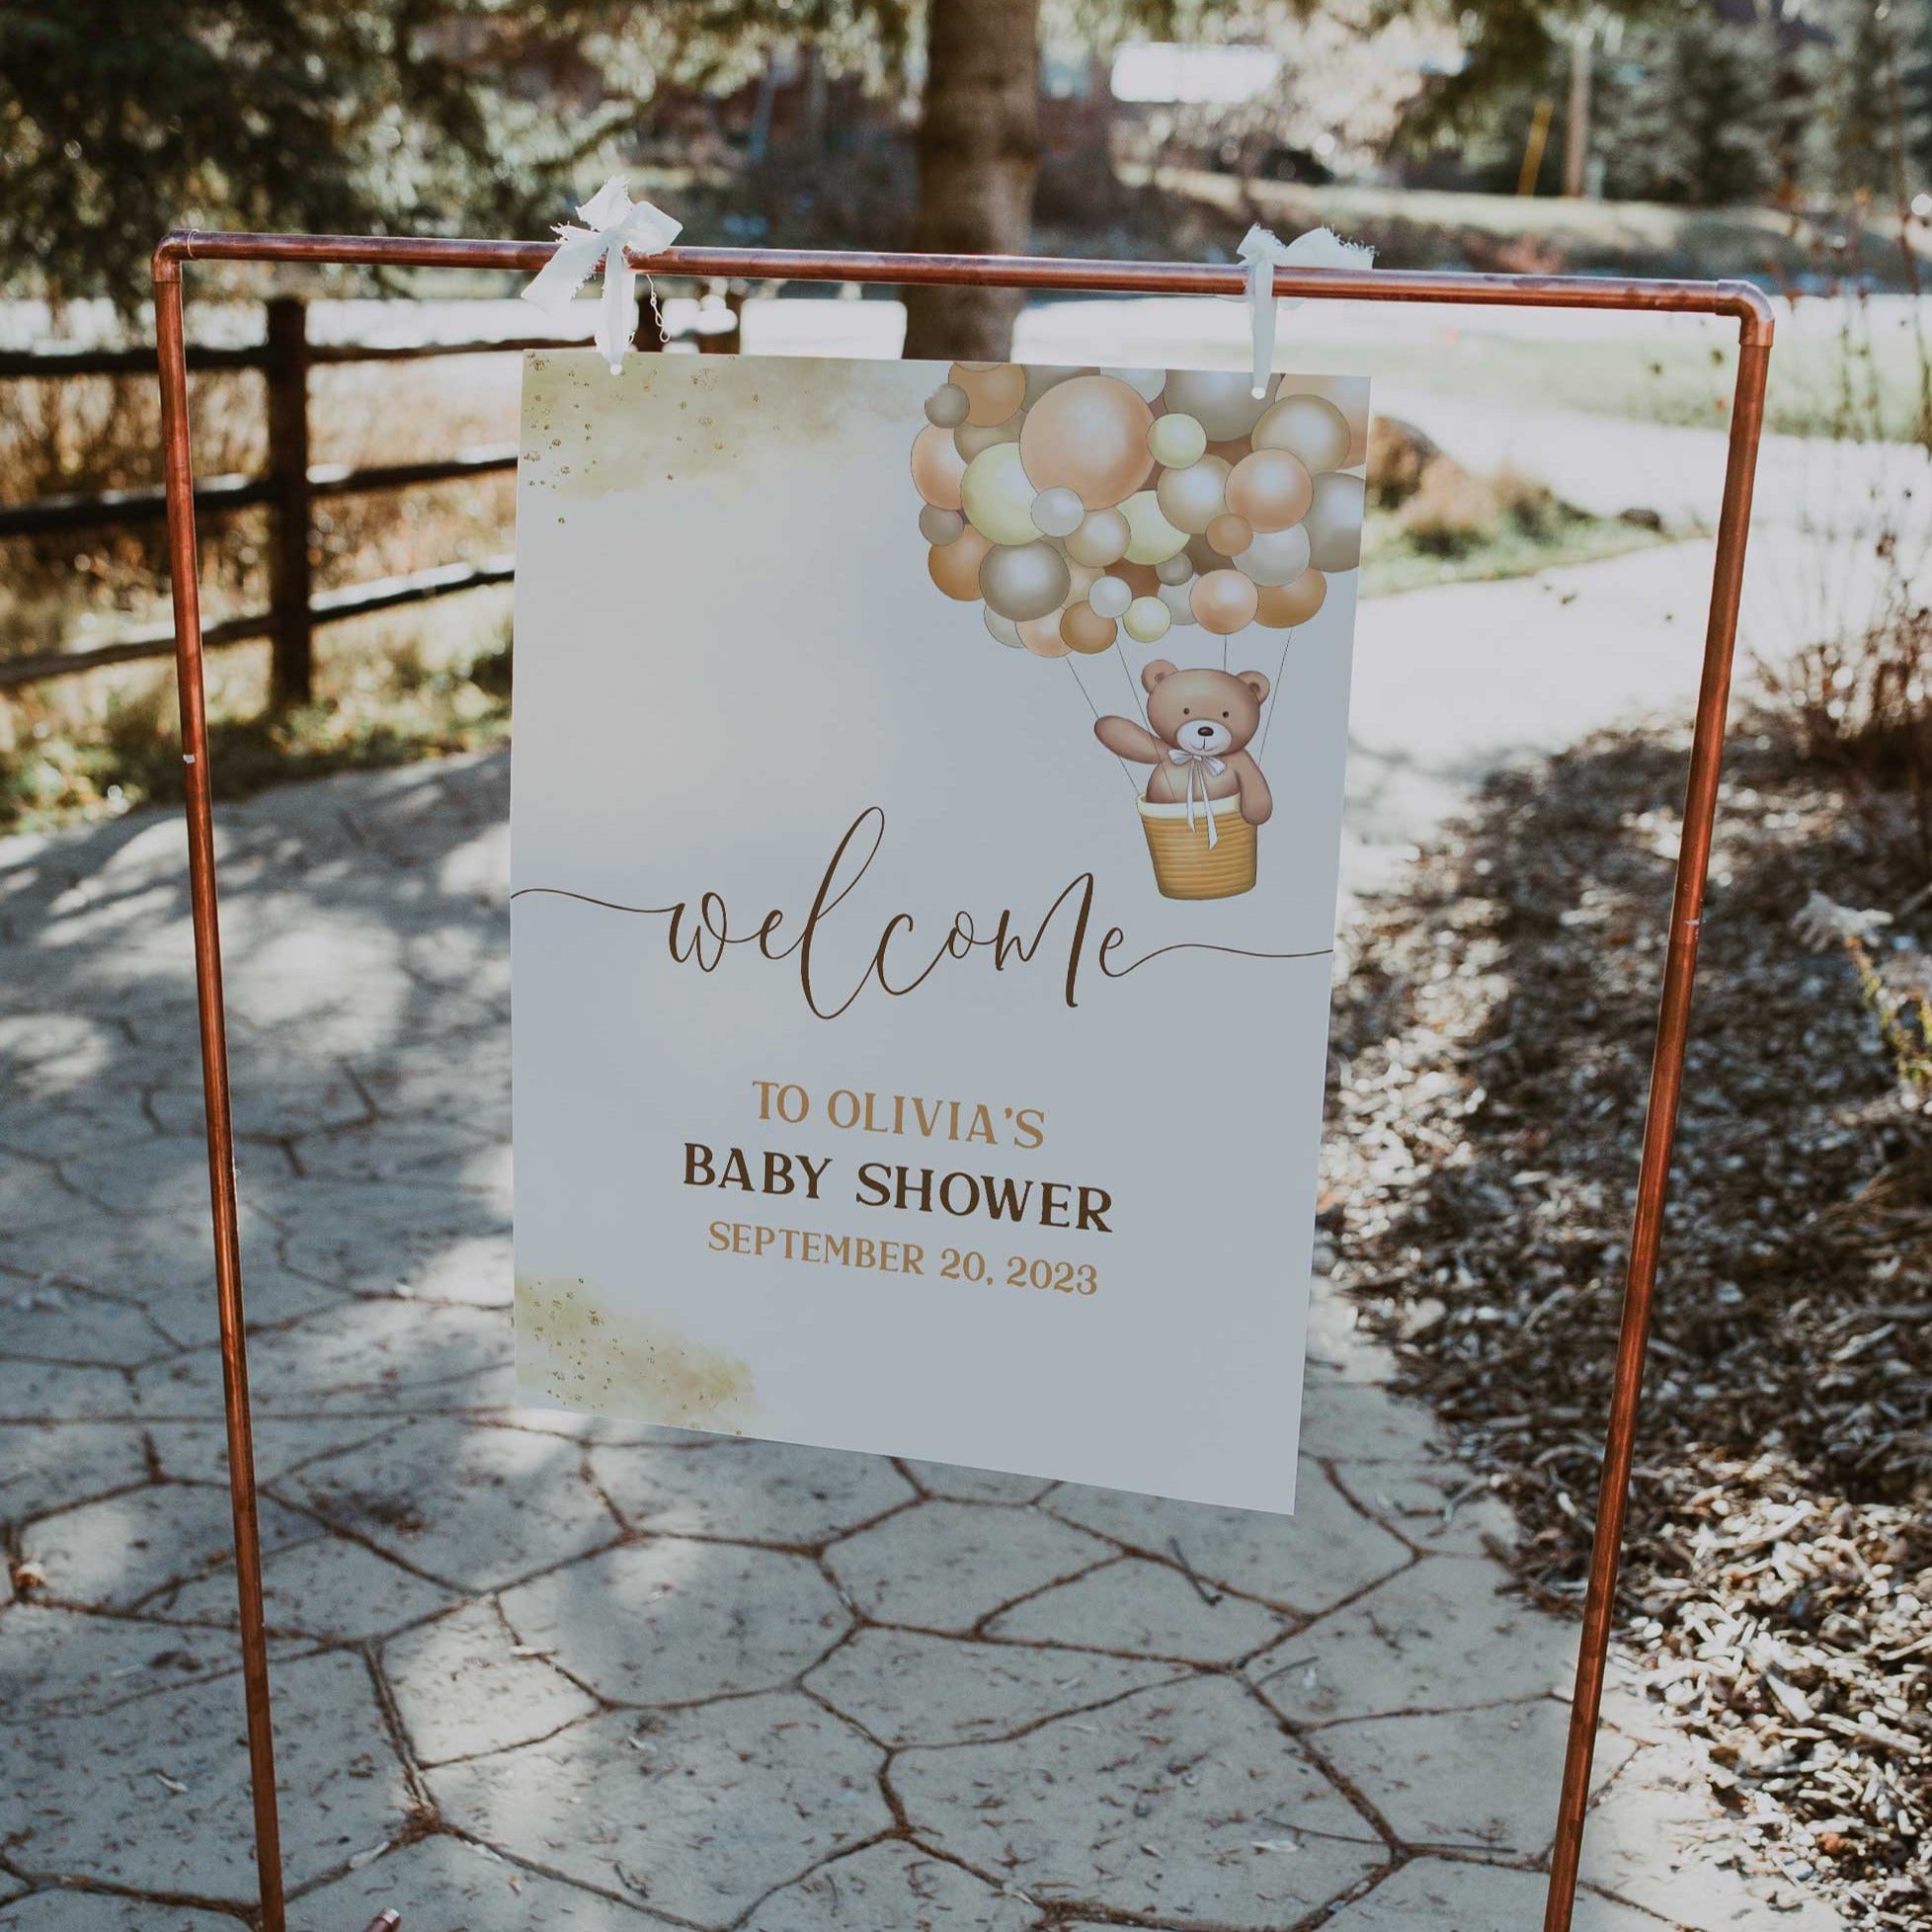 Printable baby shower welcome  with a teddy bear, we can bearly wait design